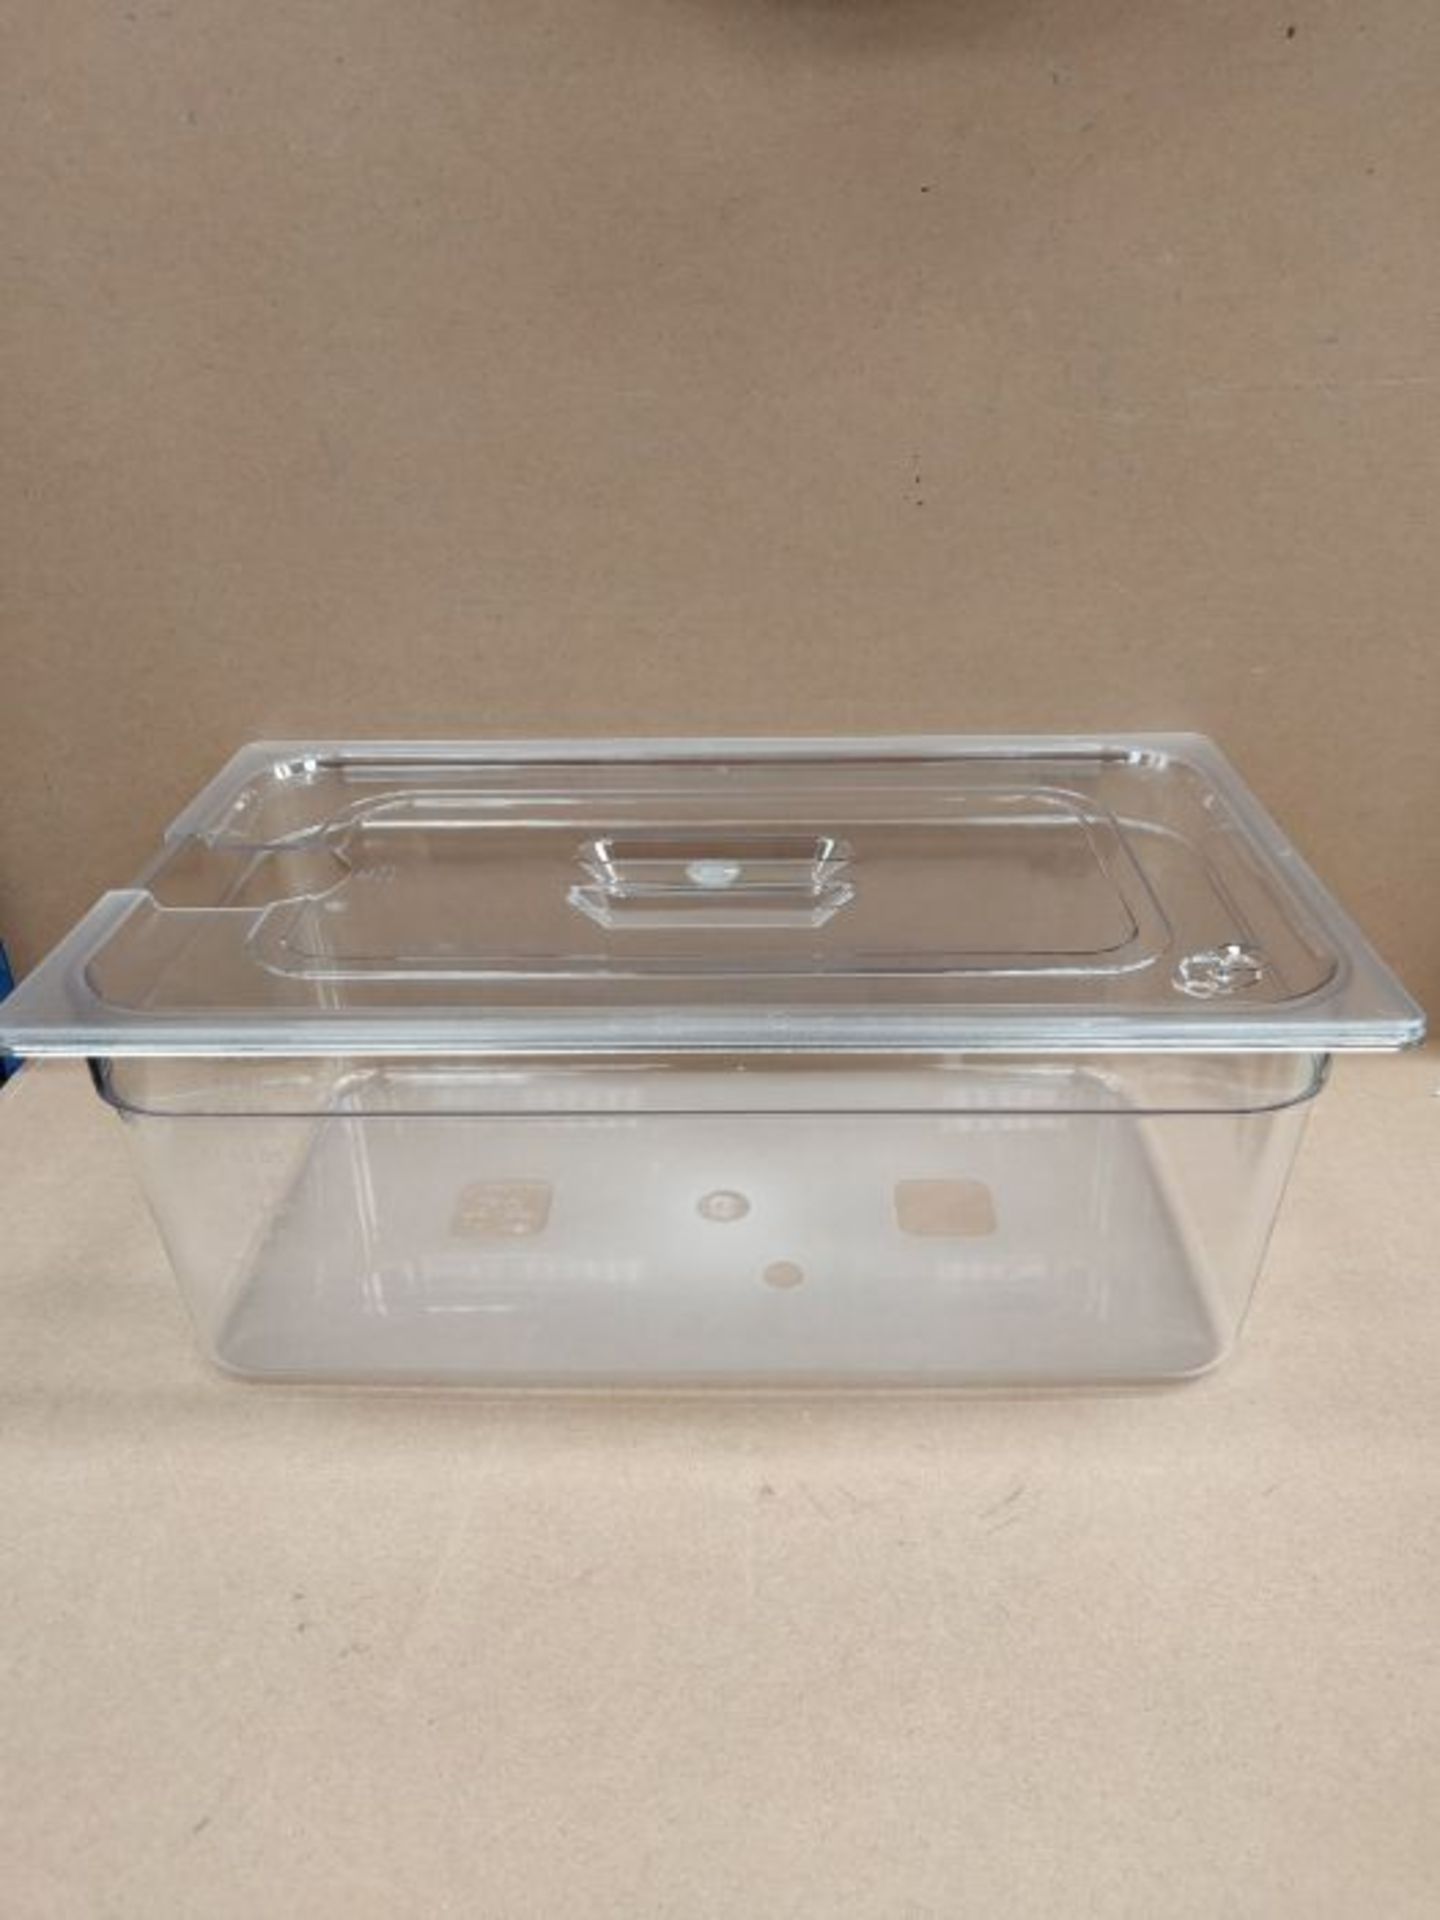 [INCOMPLETE] Sous Vide Tools 20 Litre Polycarbonate Container - Custom Cut Lid to Suit - Image 3 of 3